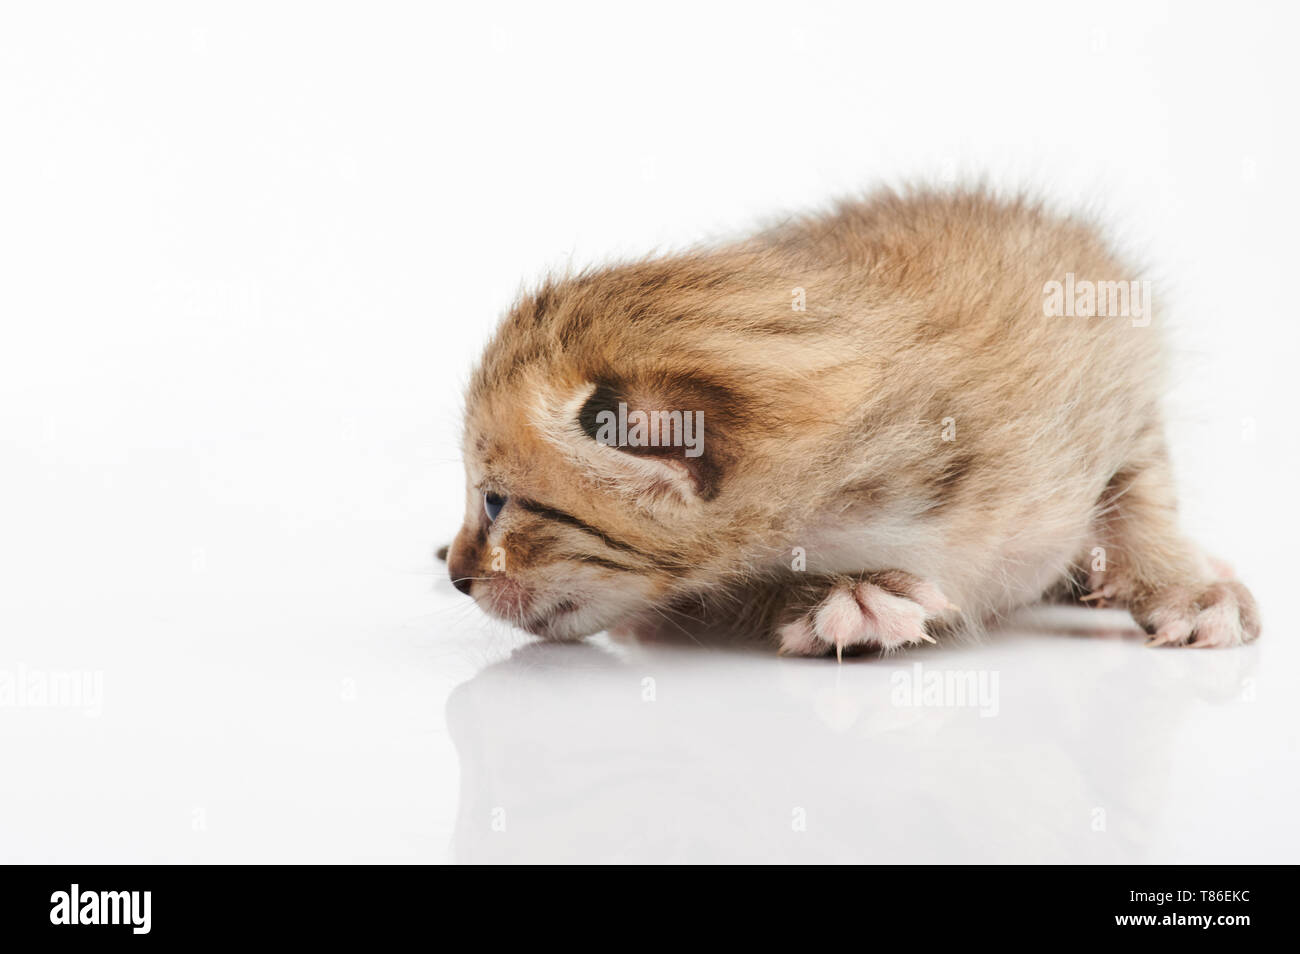 Baby kitty cat looking on side isolated on white background Stock Photo